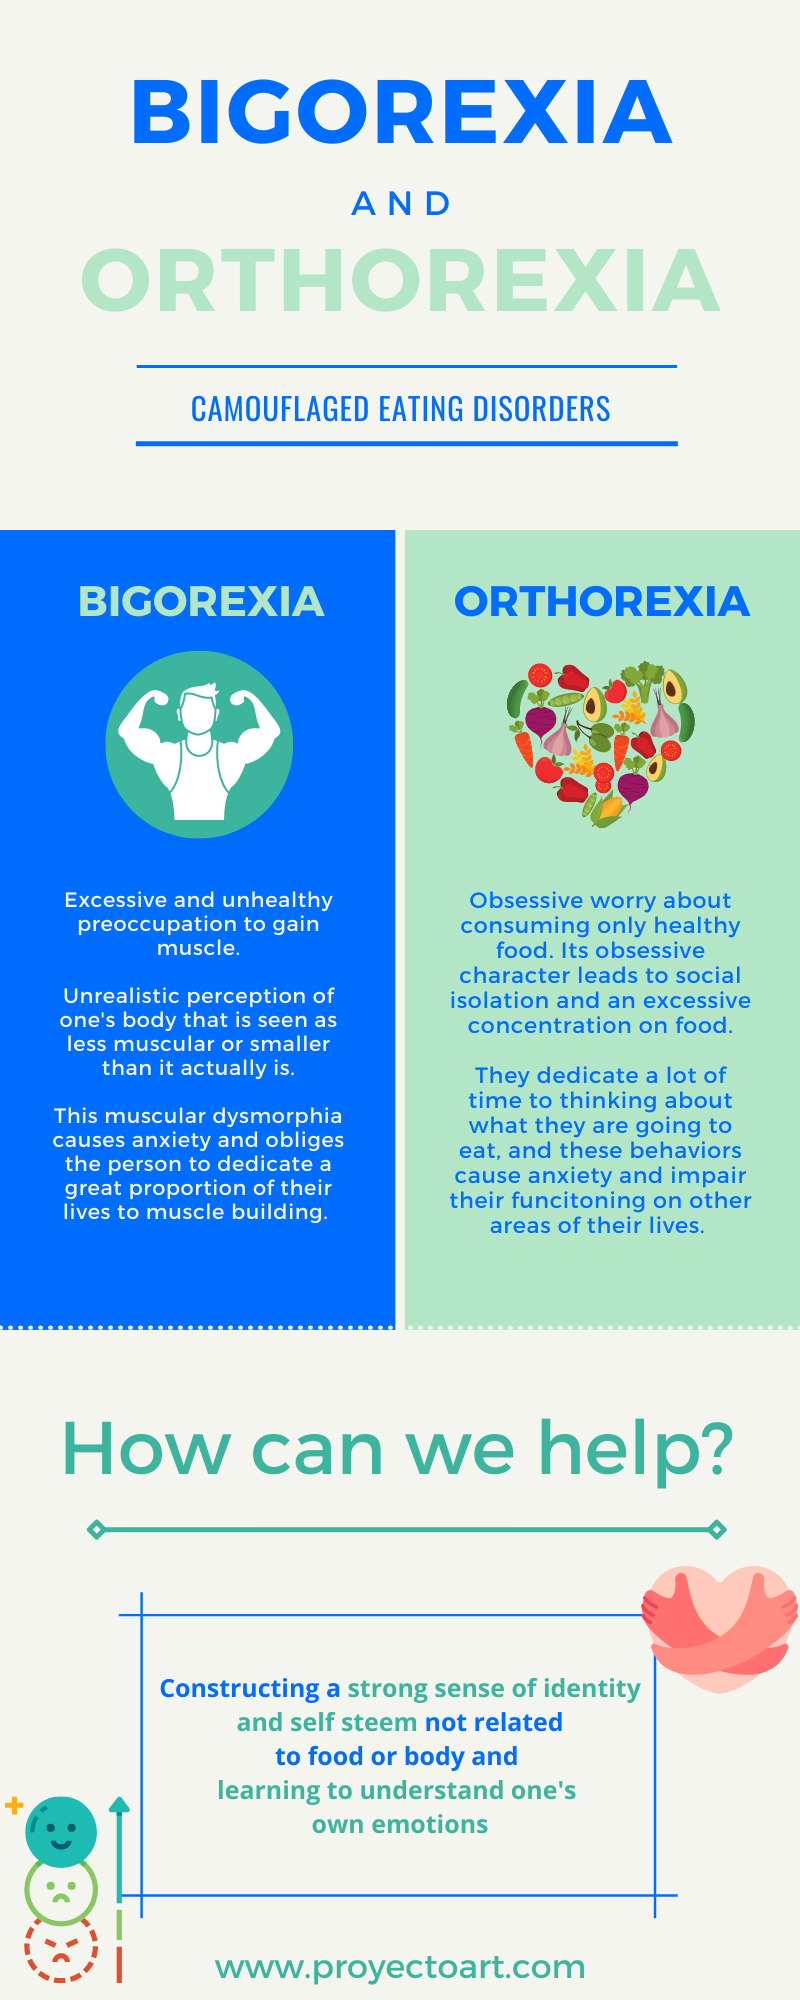 Bodybuilding and the risk of orthorexia, eating disorders in fitness